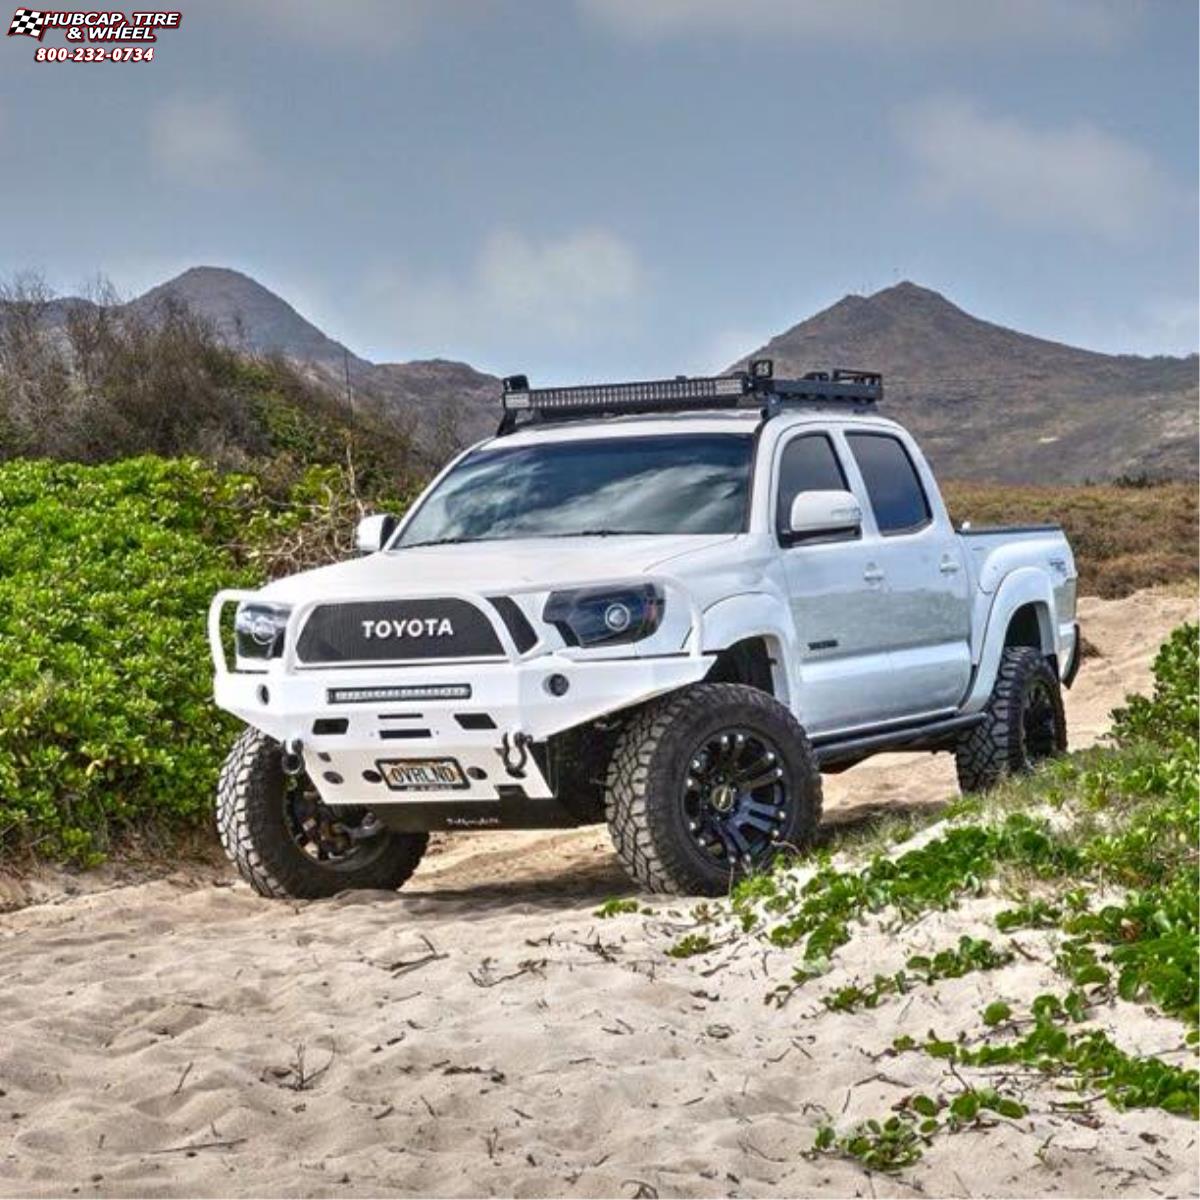 vehicle gallery/2012 toyota tacoma xd series xd778 monster x  Matte Black wheels and rims